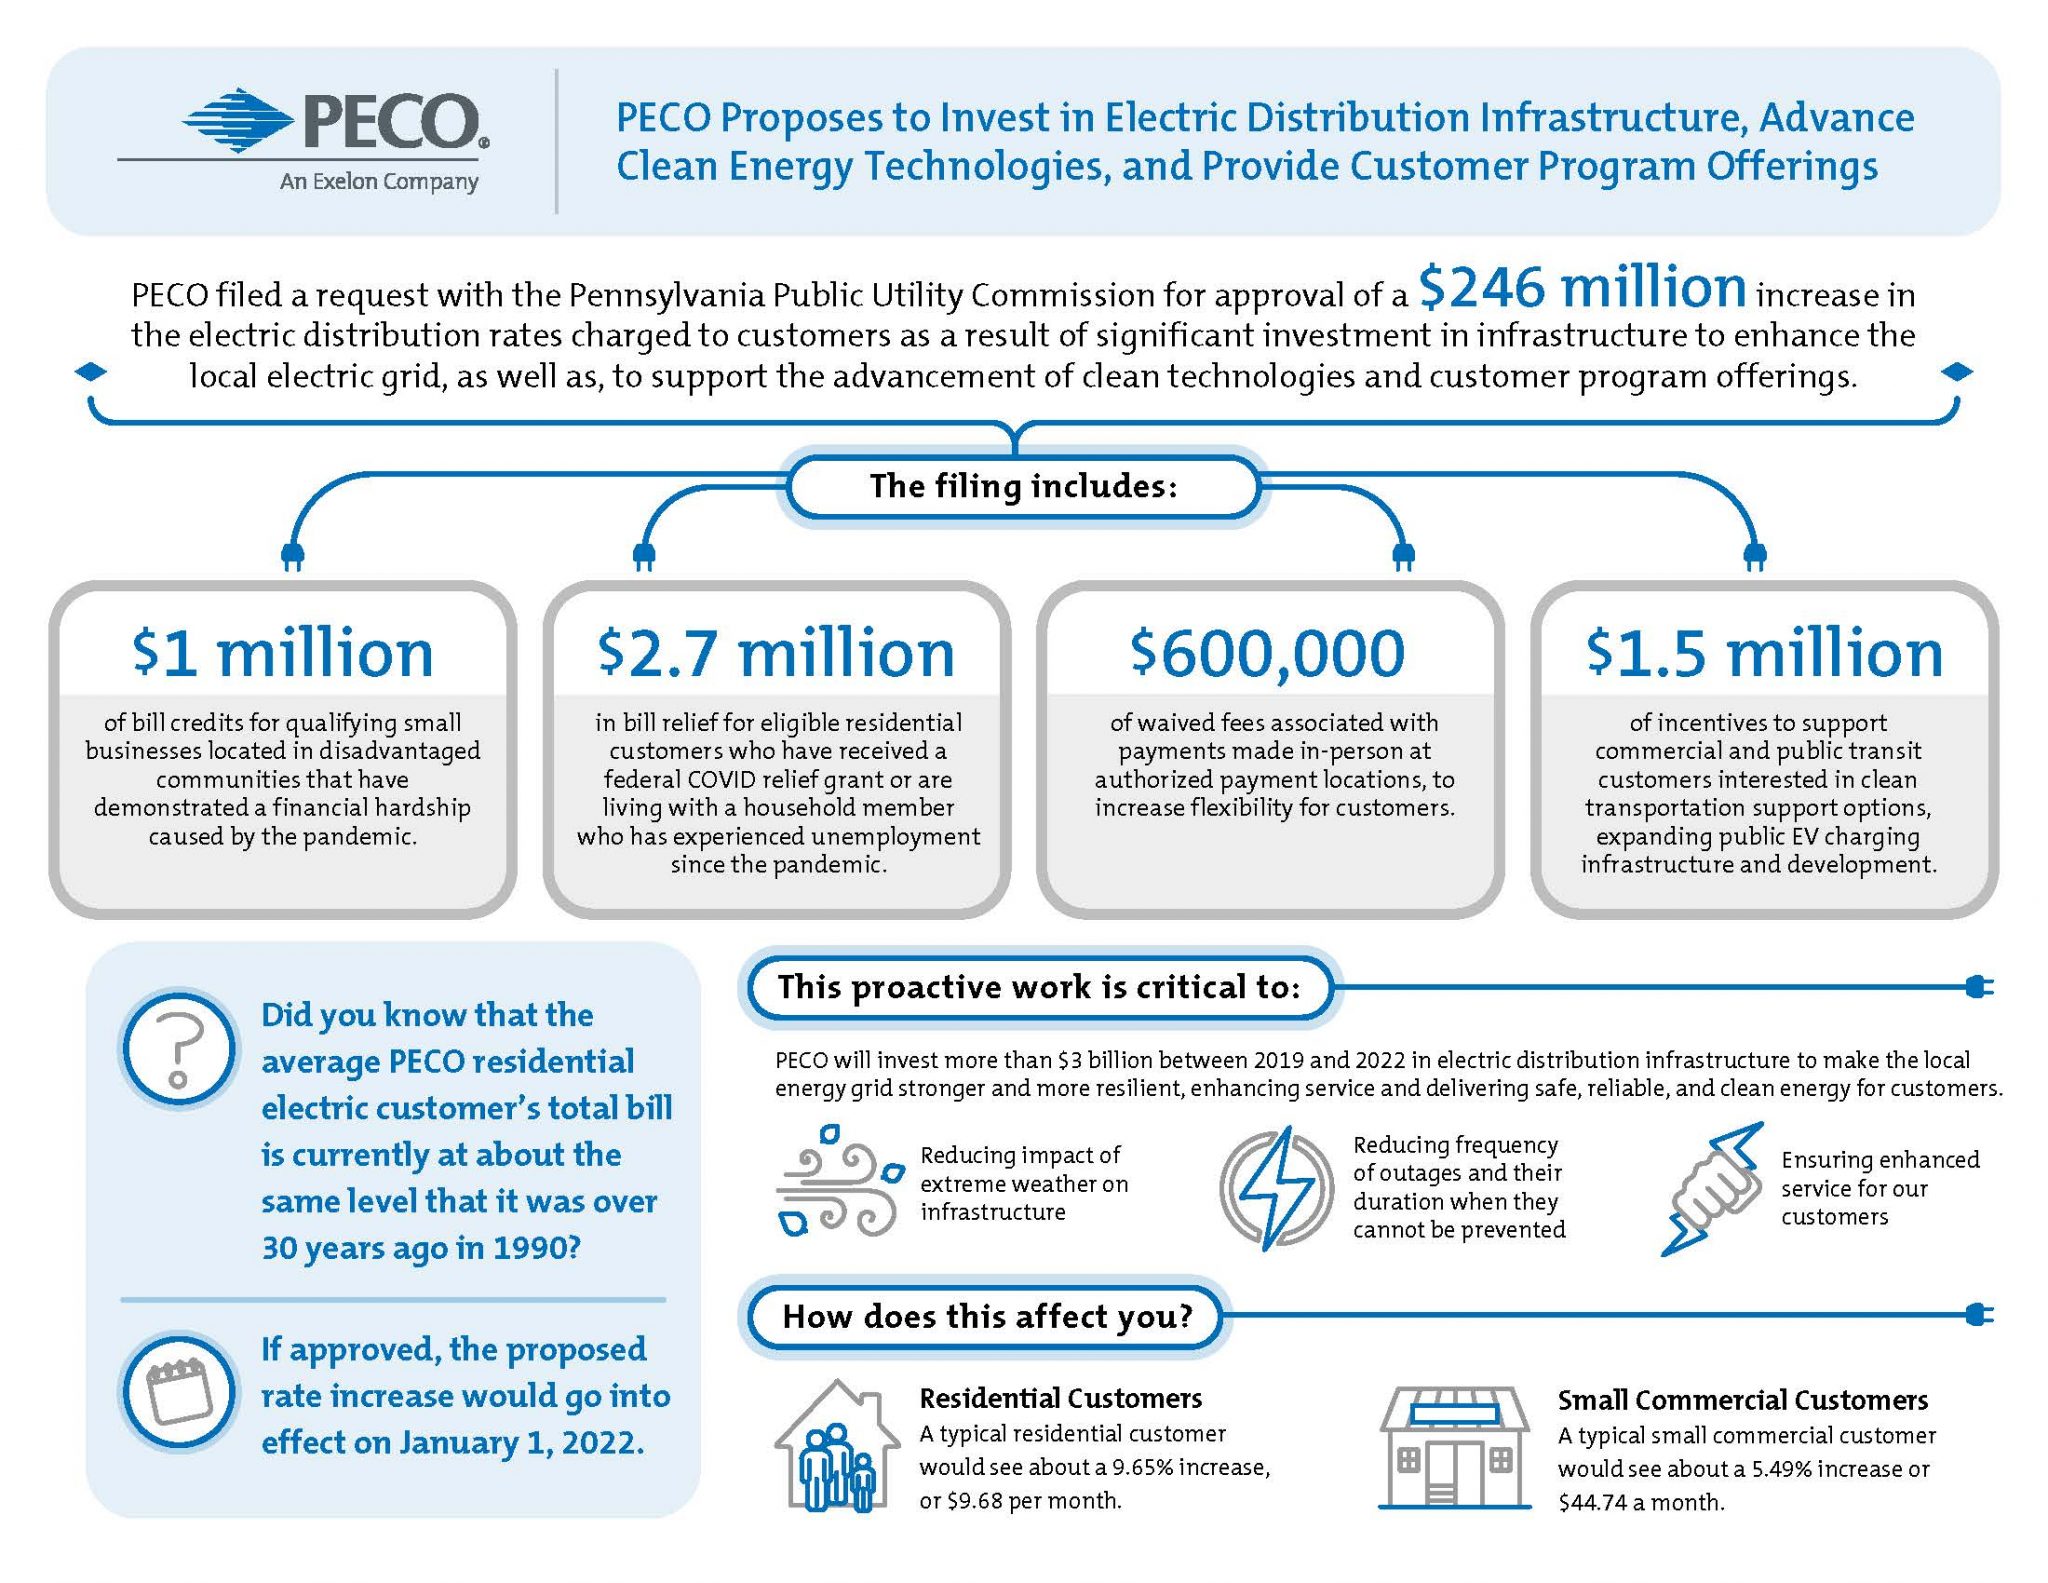 PECO Proposes to Increase Residential Customers Monthly Bill Lower